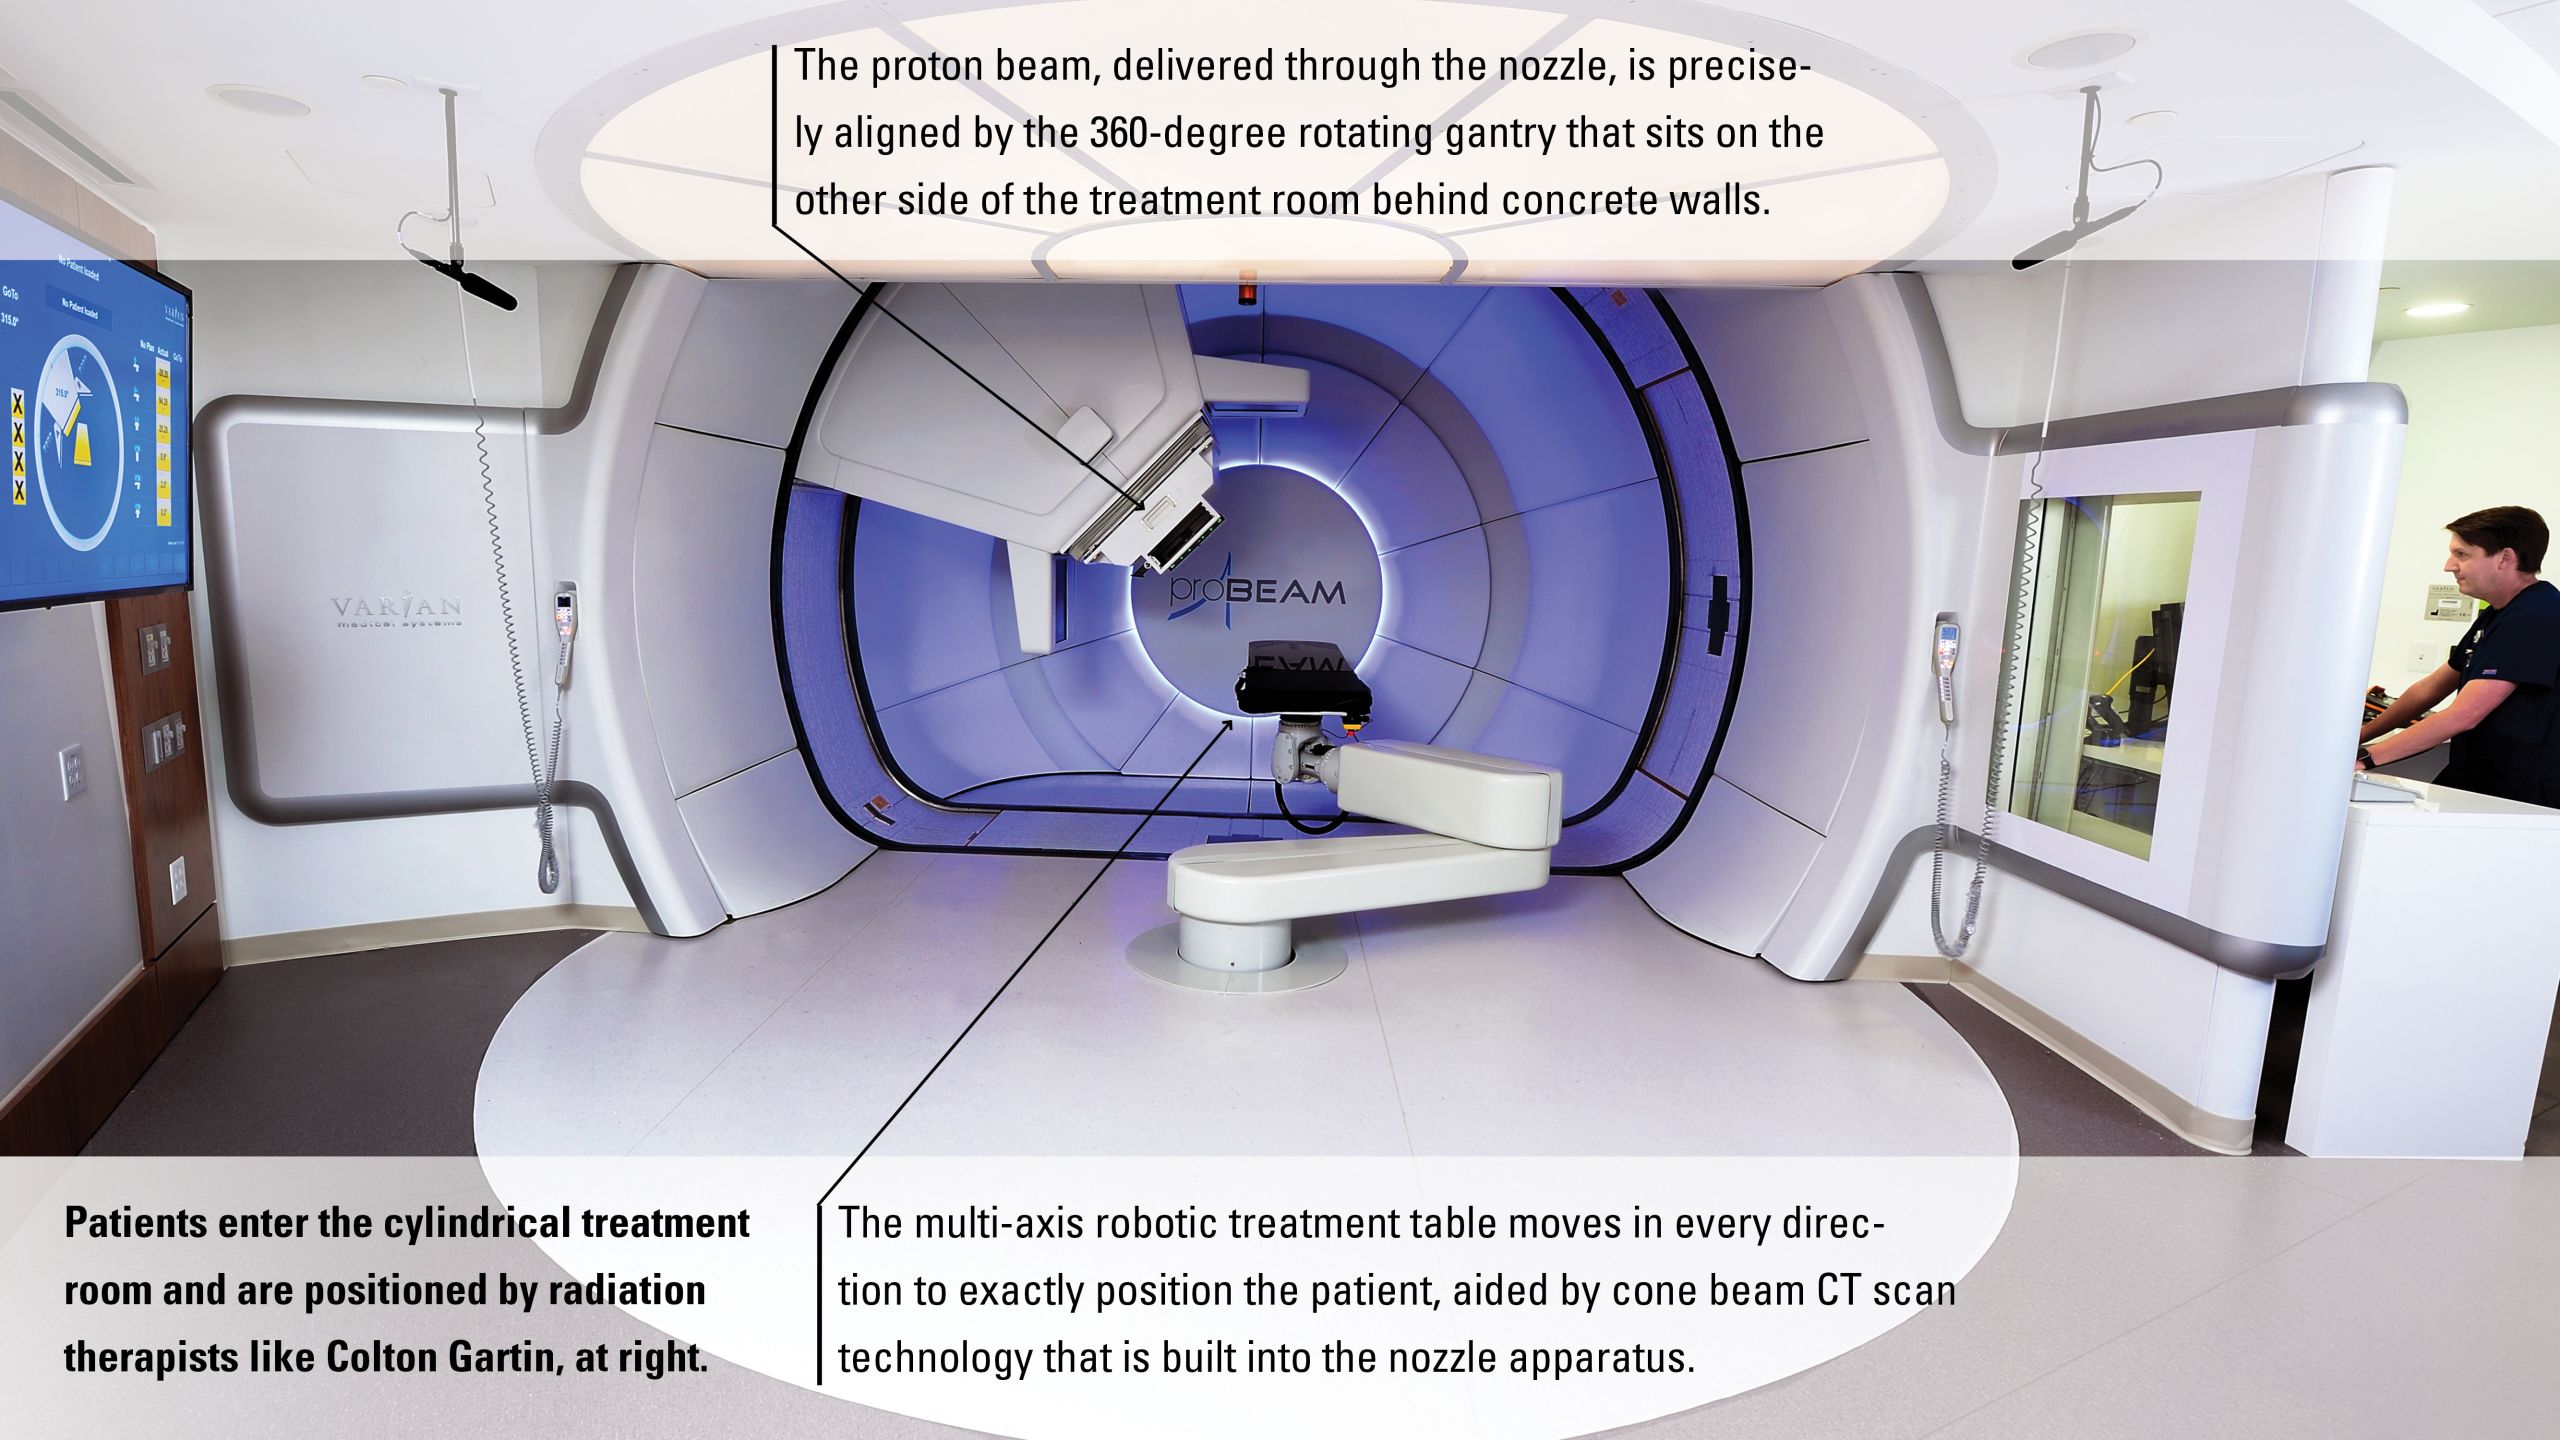 The picture shows the whole treatment room. In the center is a cylindrical area where the proton beam is delivered through a nozzle to the patient on the treatment table. The cylindrical shape is because the proton beam can be precisely aligned to any part of the patient by the 360-degree rotating gantry that sits on the other side of the treatment room behind concrete walls. Patients are positioned on the multi-axis robotic treatment table by radiation therapists like Colton Gartin, seen on the far right.  The treatment table moves in every direction to exactly position the patient, aided by cone beam CT scan technology built into the nozzle.  